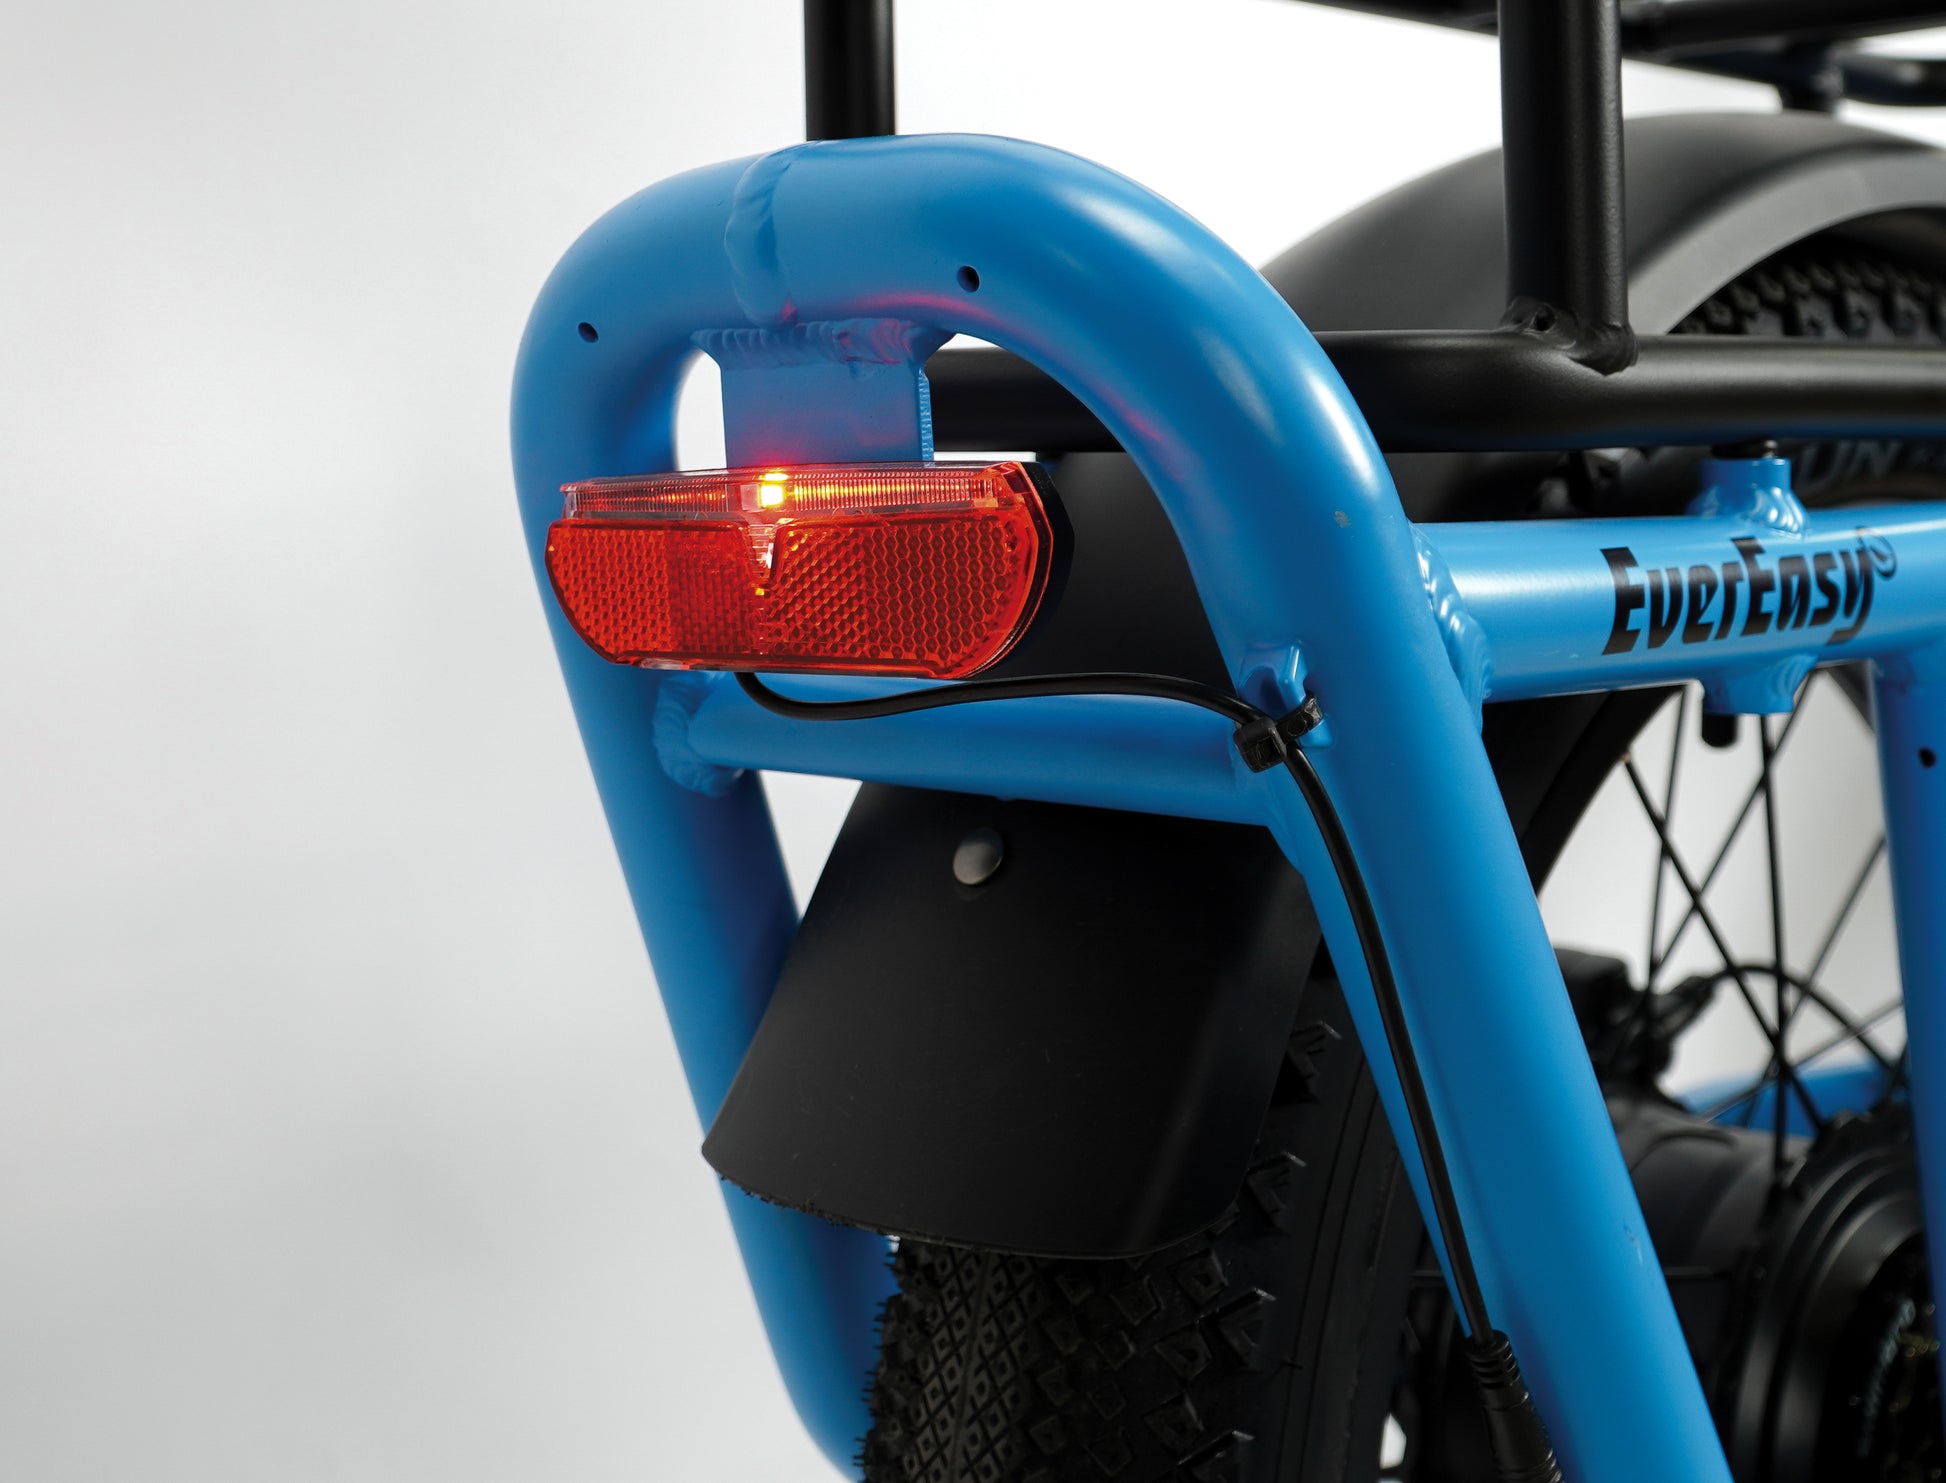 Everyday EverEasy electric cargo bike integrated tail light and reflector